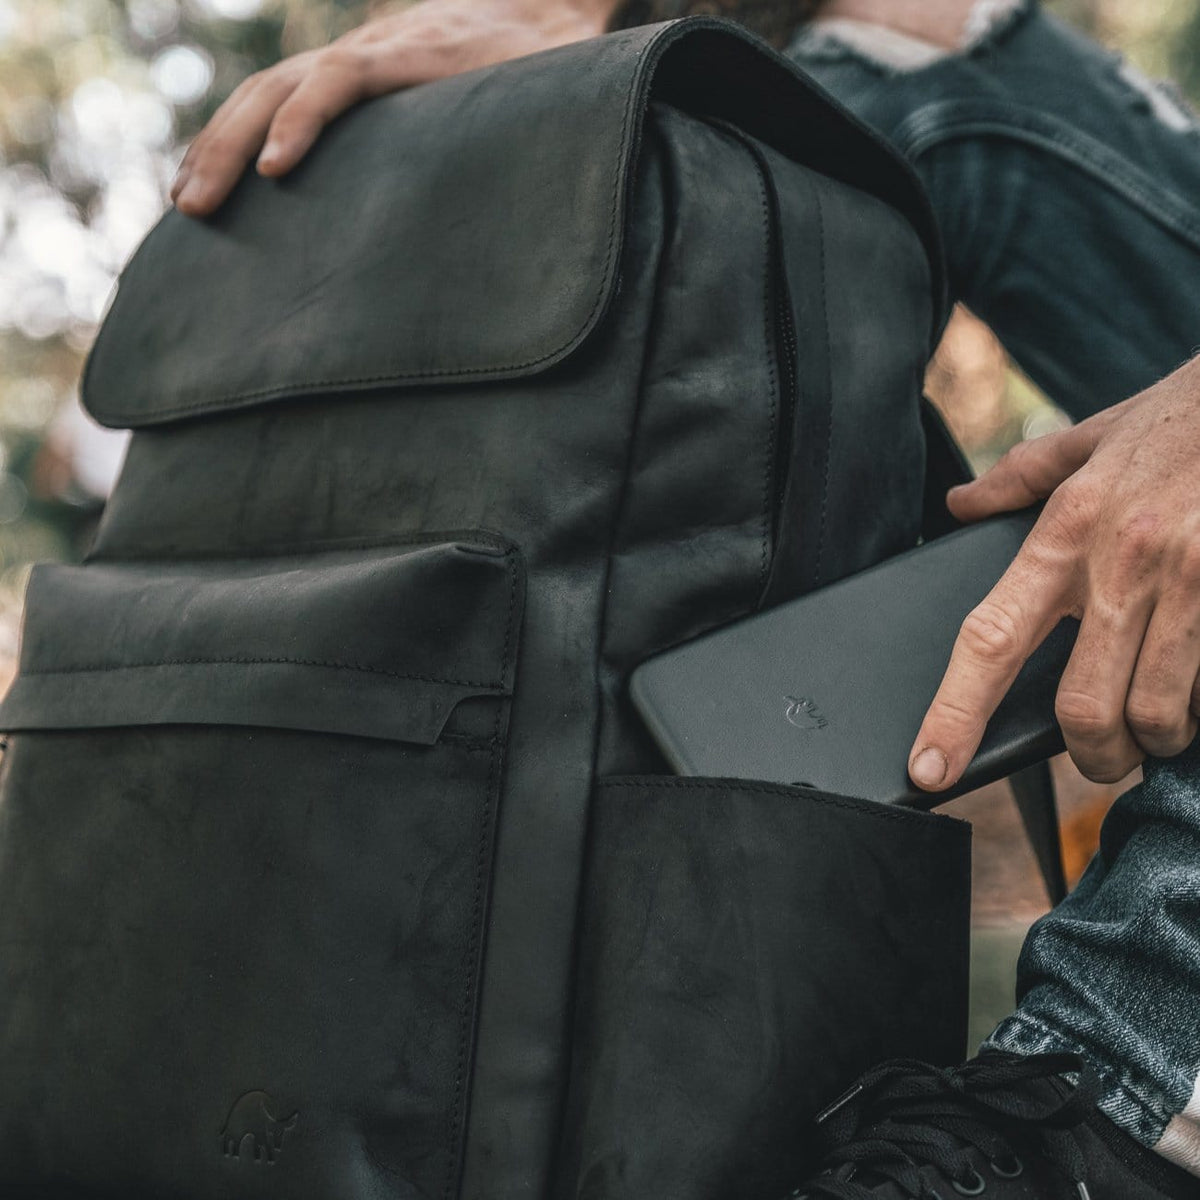 Leather Rugged Backpack - Black Edition